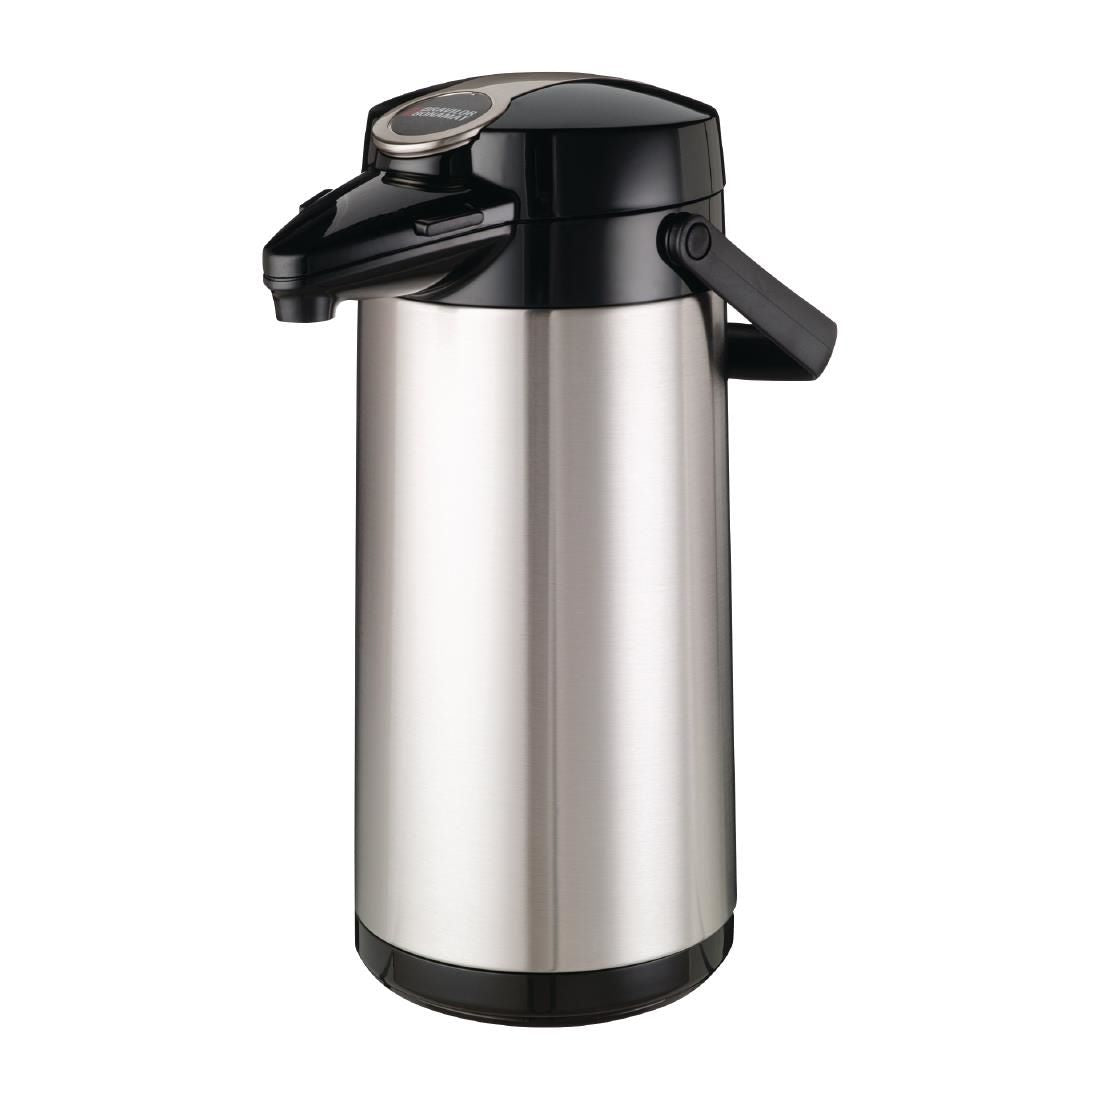 Bravilor Furento 2.2Ltr Pump Action Stainless Steel Airpot JD Catering Equipment Solutions Ltd